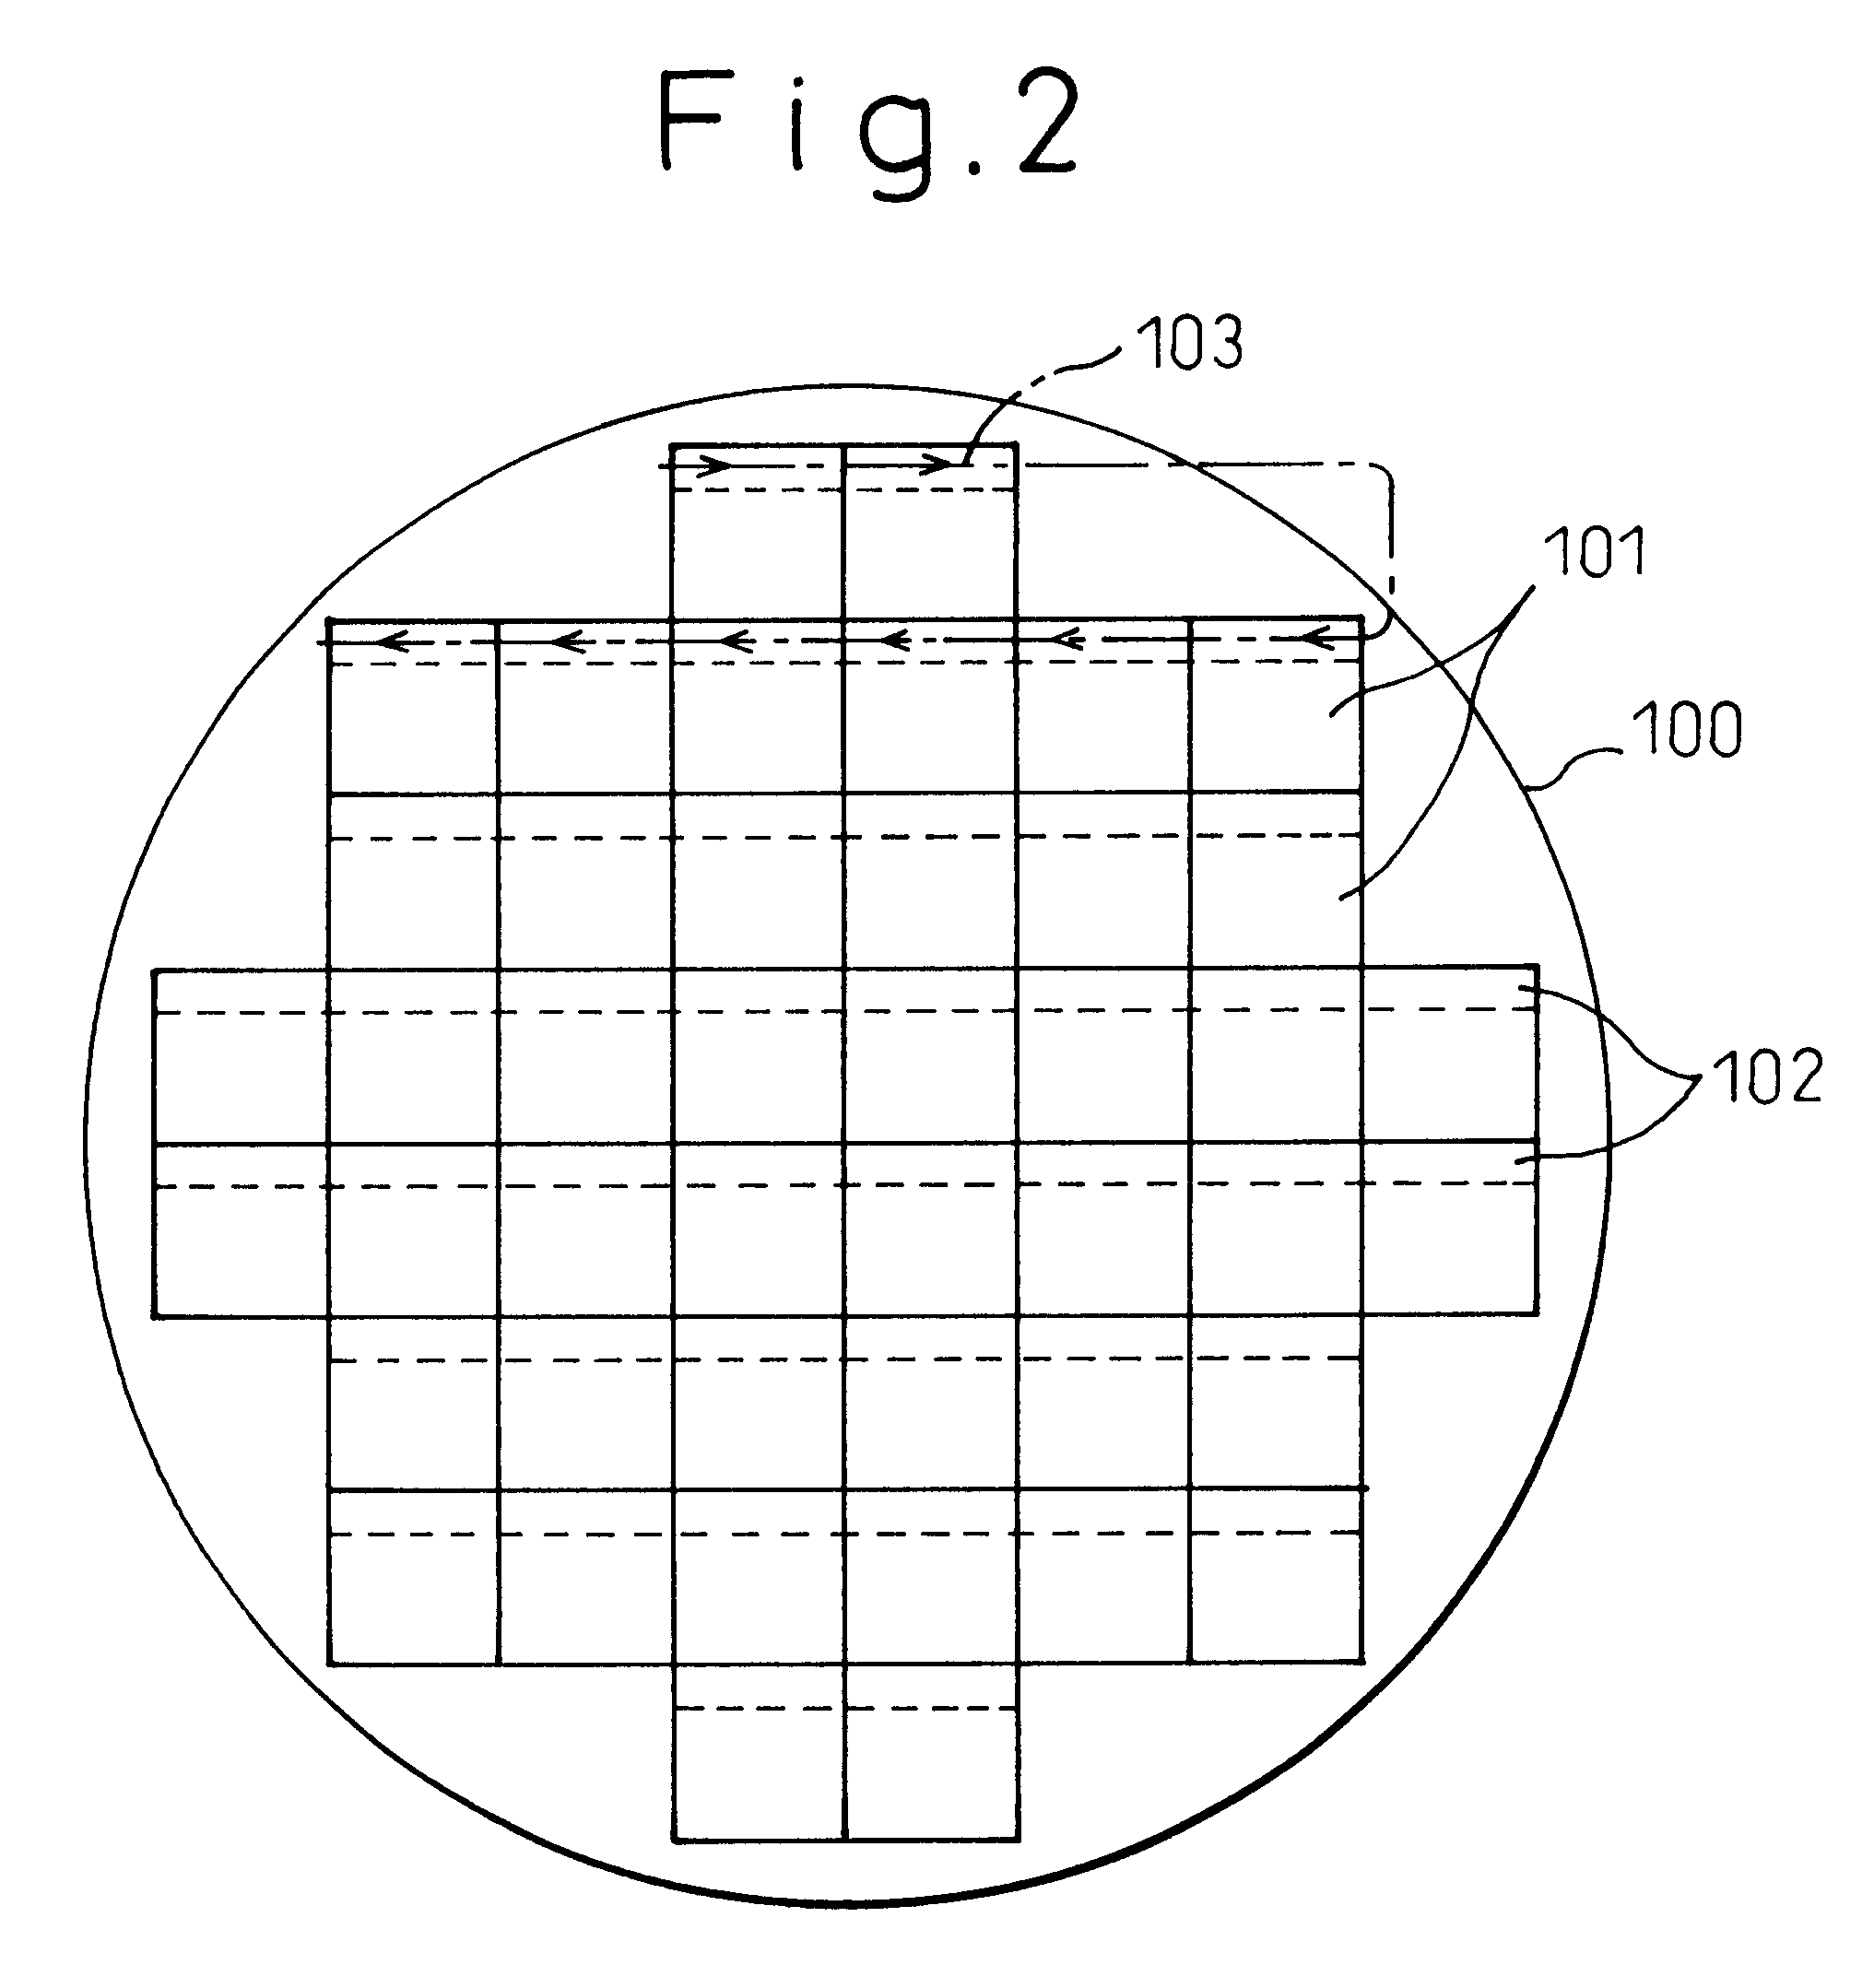 Appearance inspection machine and method for concurrently performing defect detection and classification